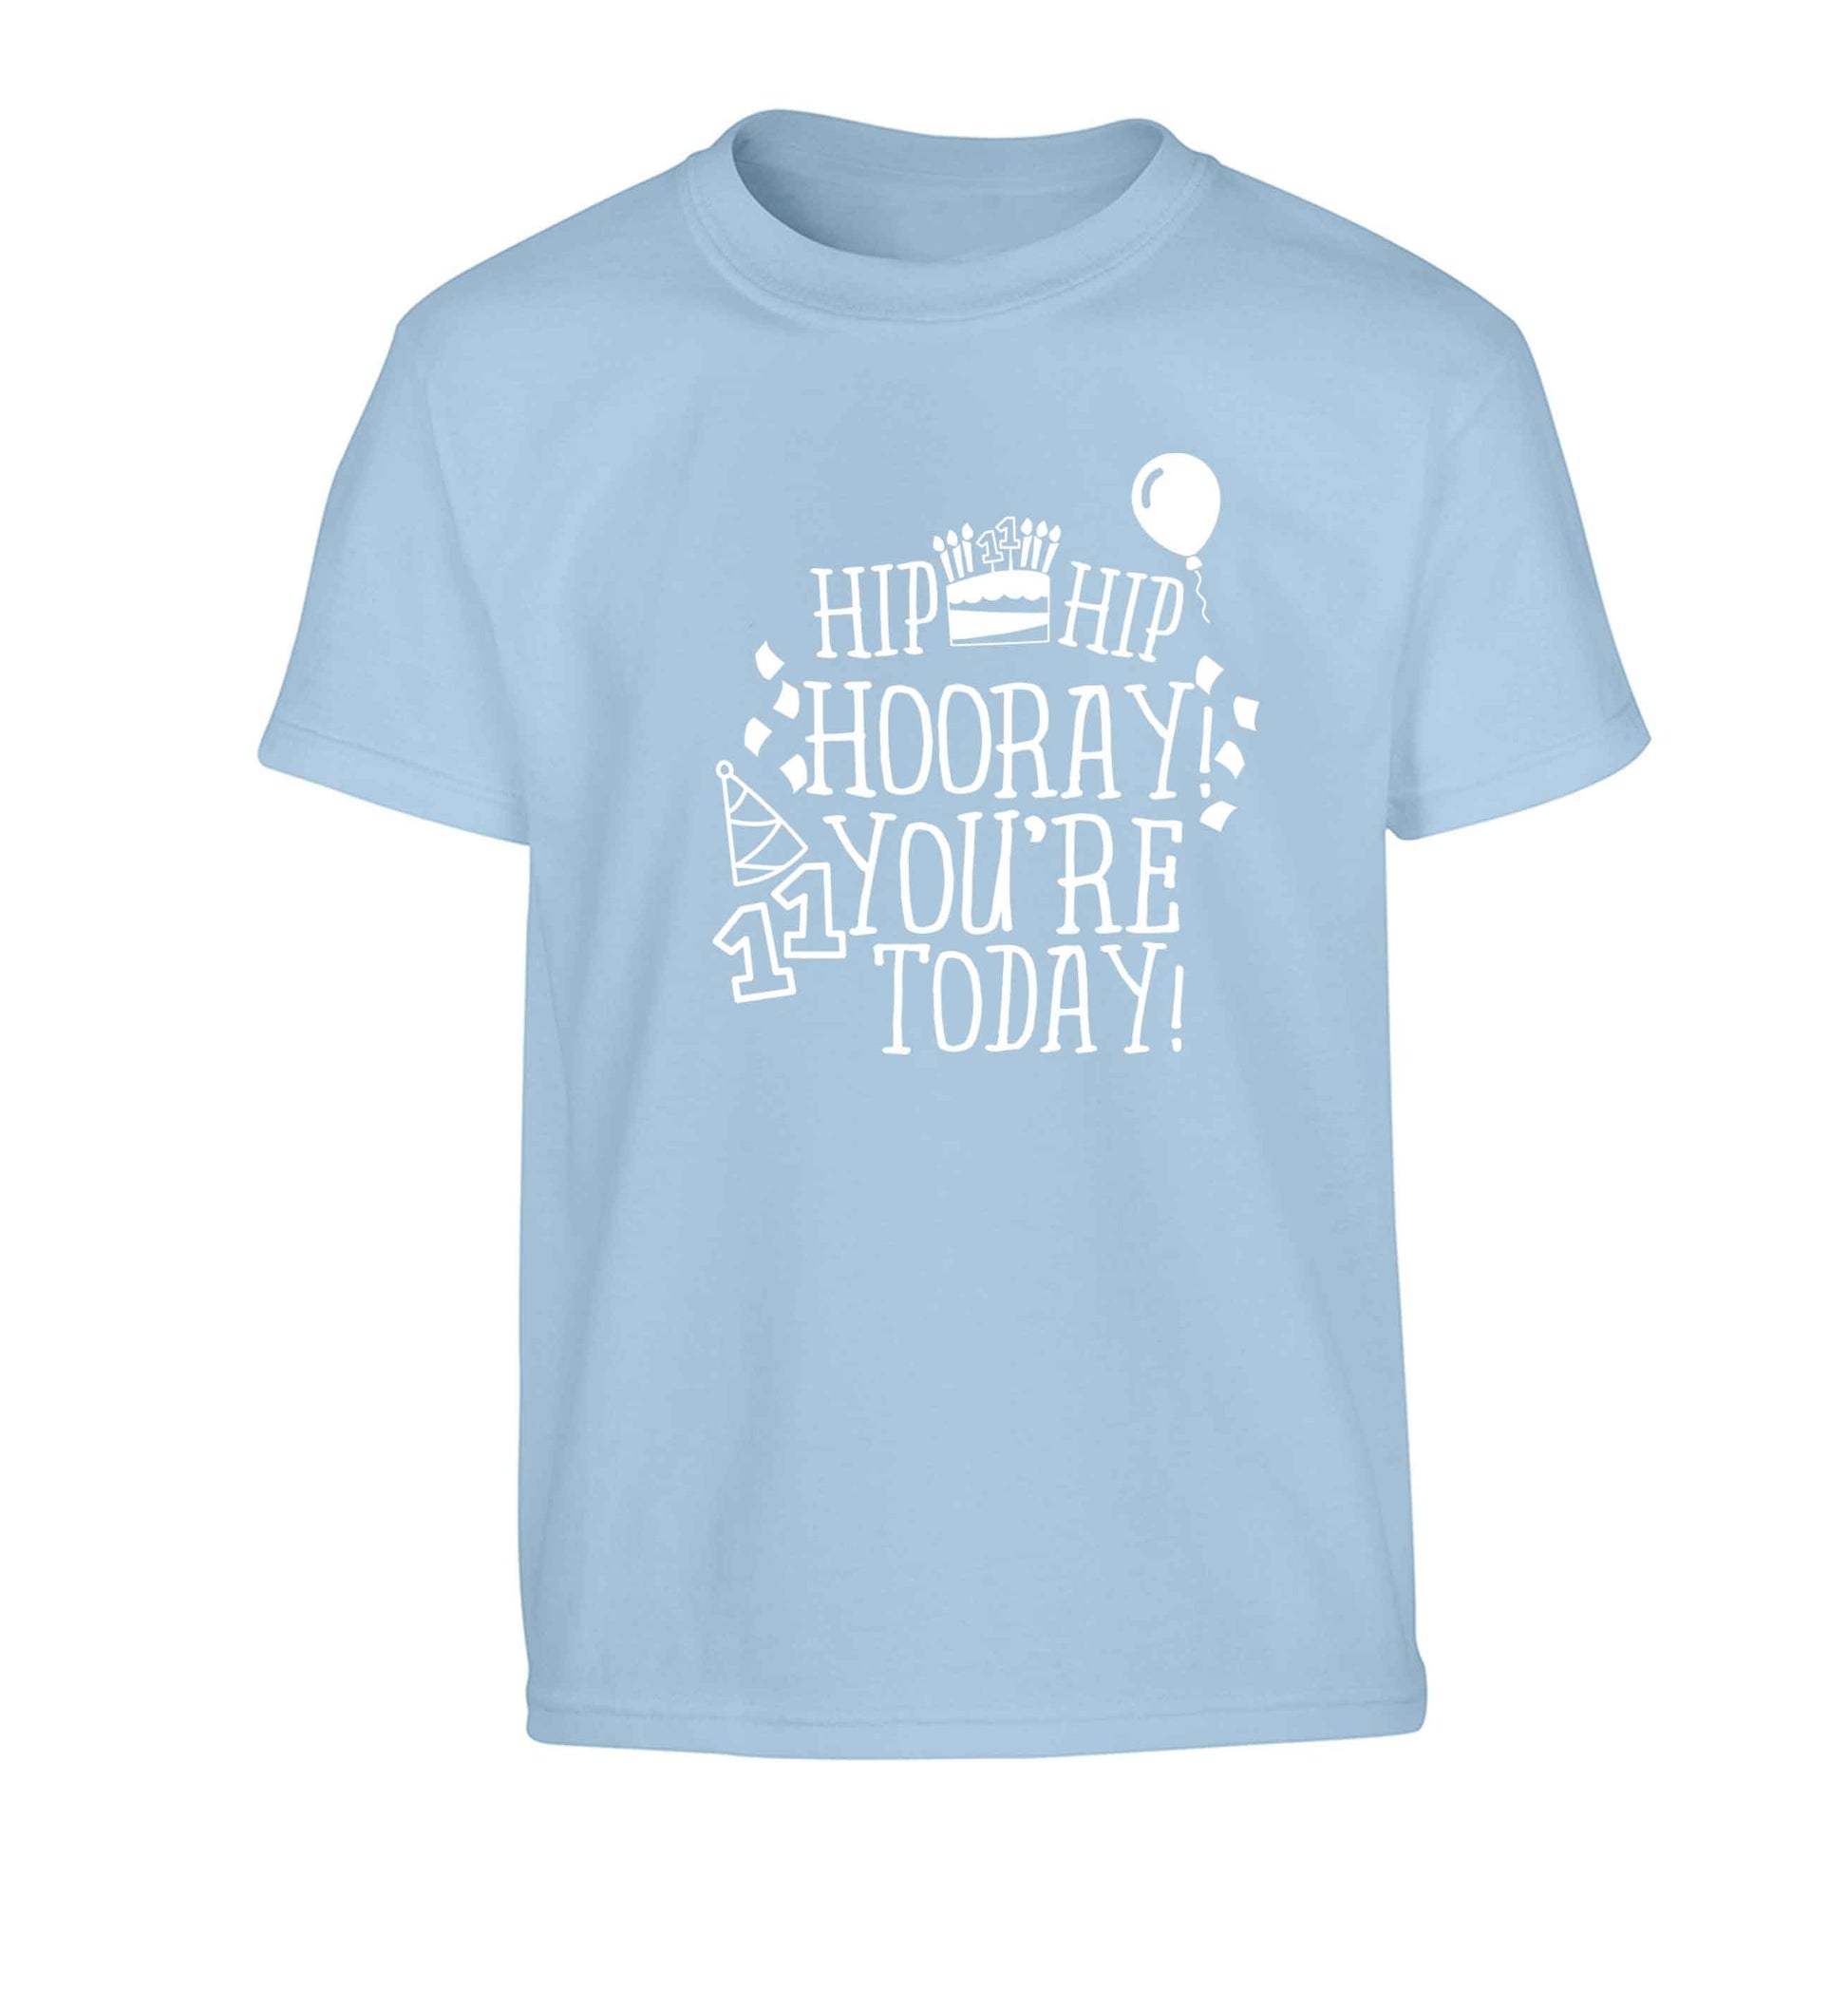 Hip hip hooray I you're eleven today! Children's light blue Tshirt 12-13 Years